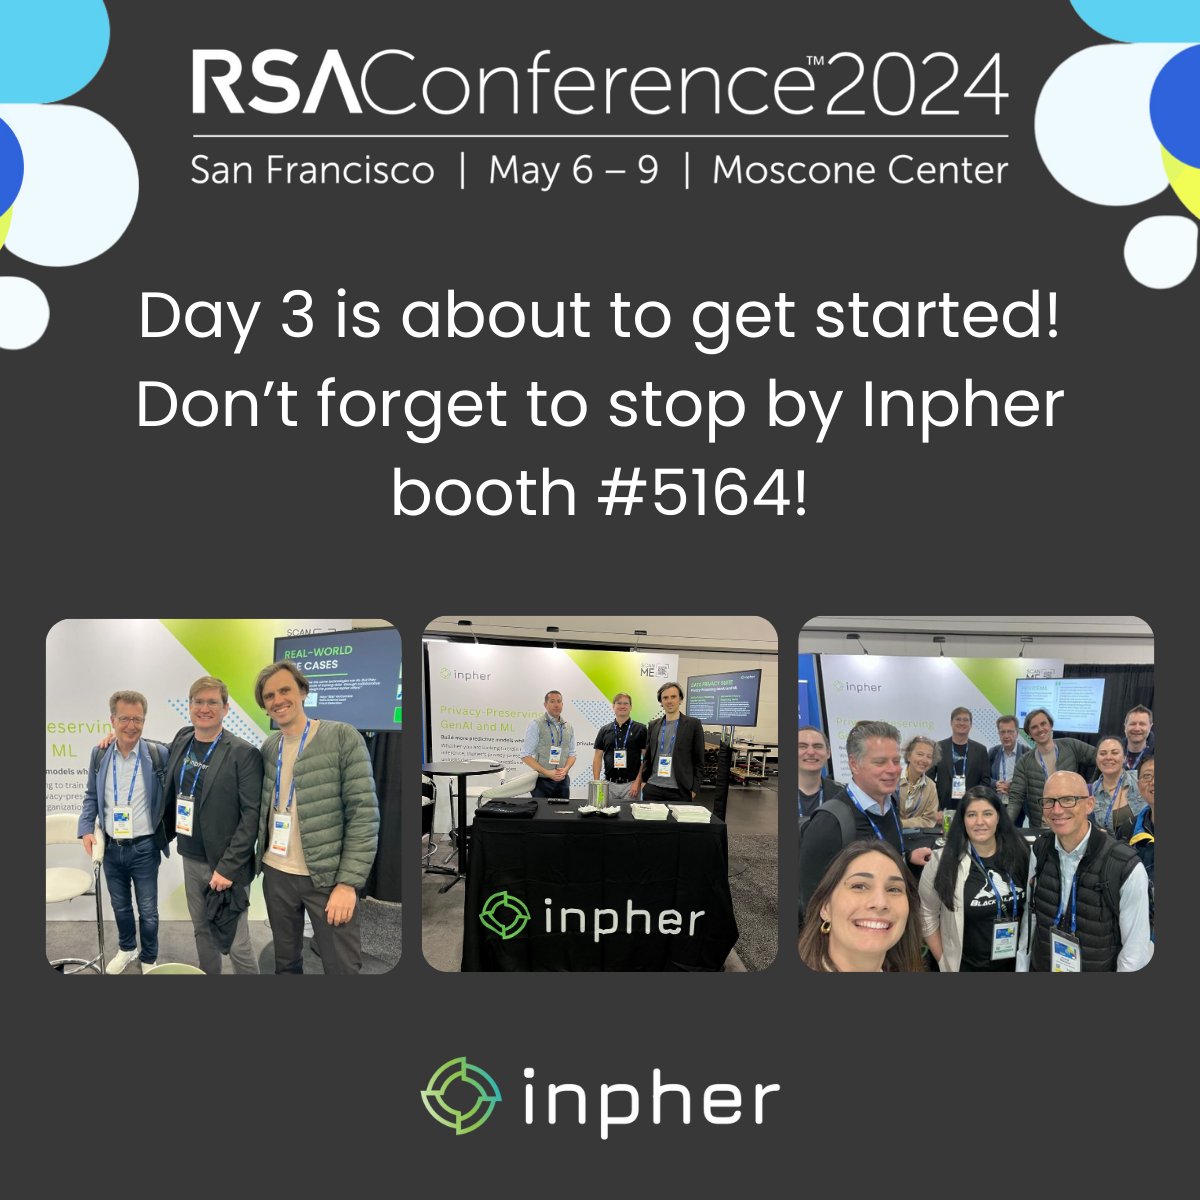 🌟 Good morning, RSA Conference attendees! Day 3 has arrived, let's make it a great one!